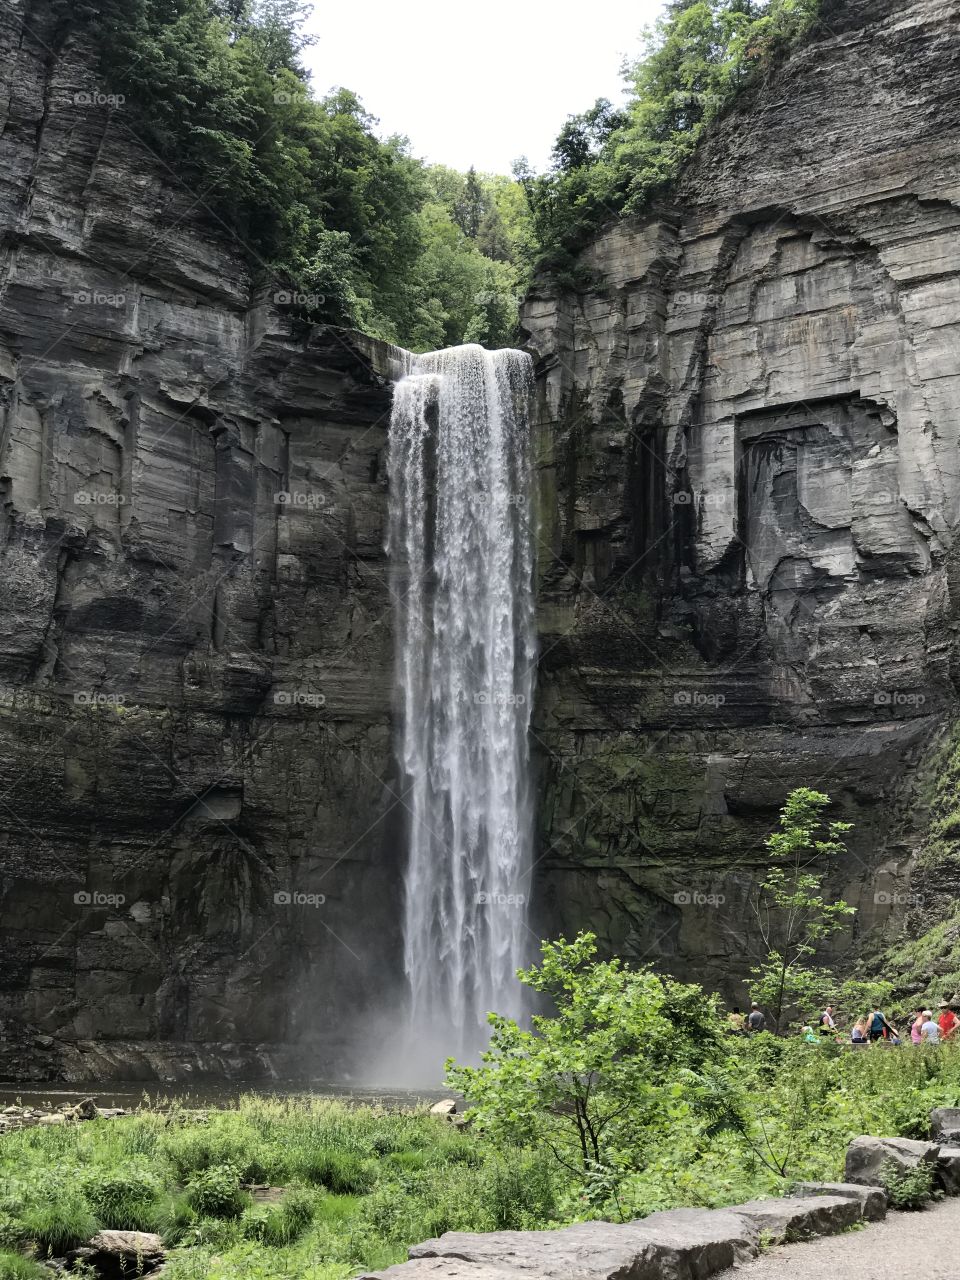 Taughannock Falls- Ithaca is Gorges